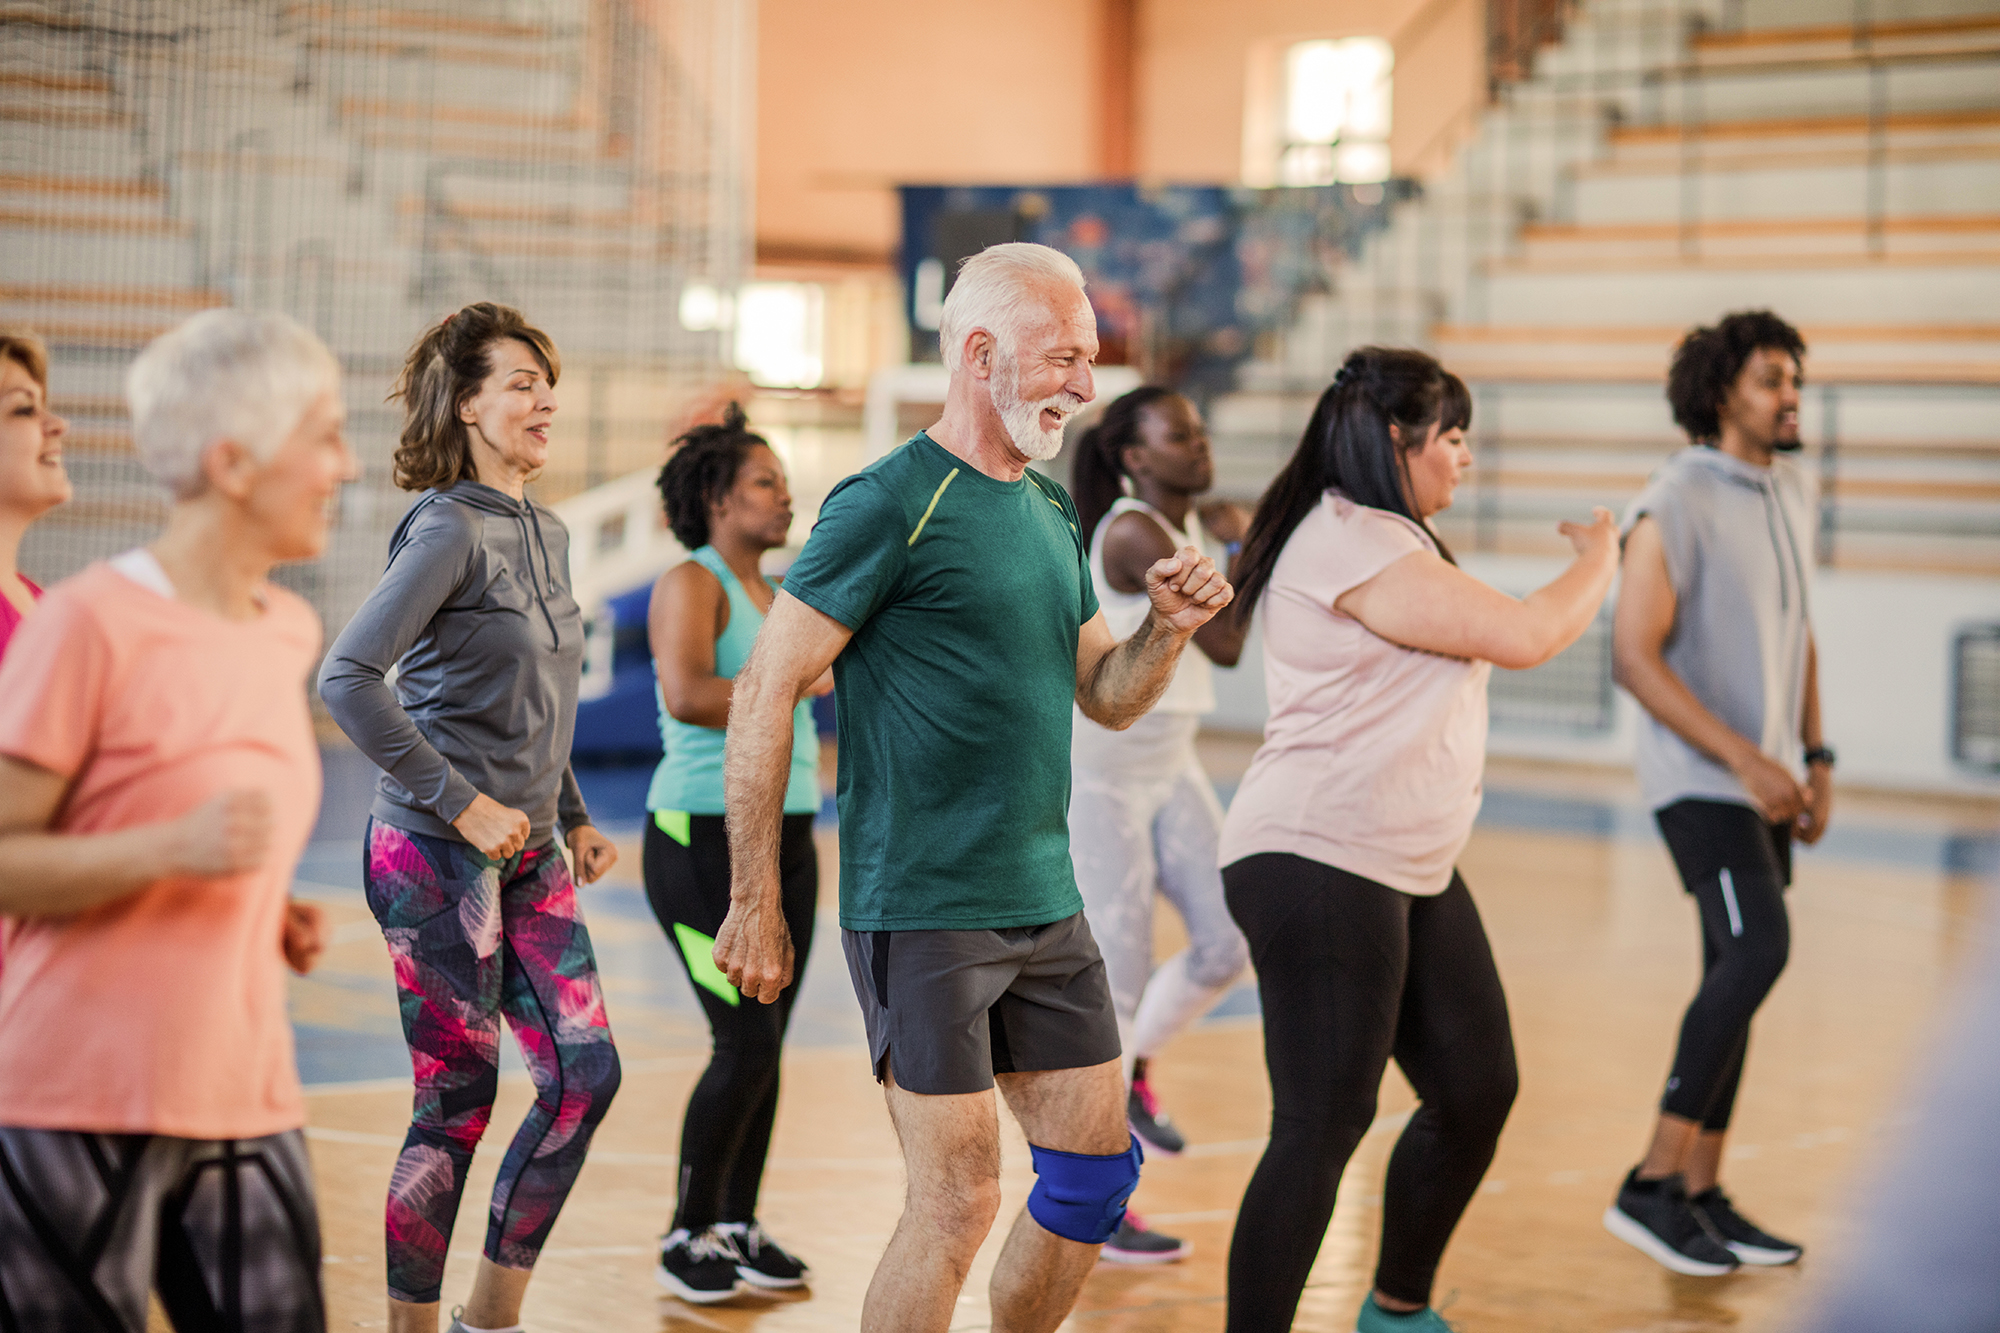 Group of adults of different ages dancing in an exercise class